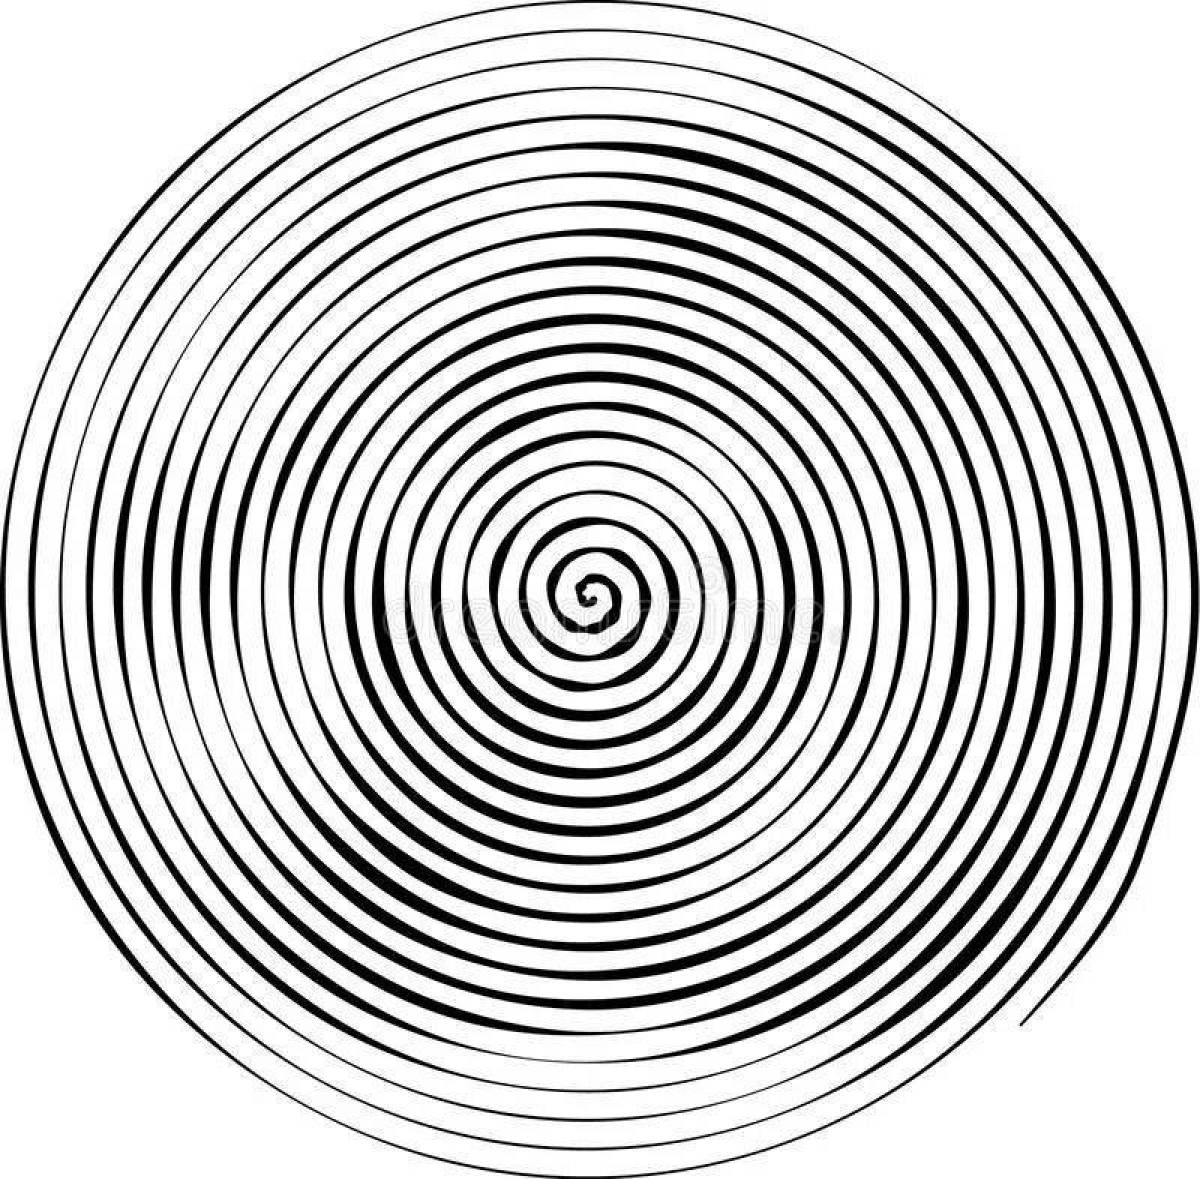 Amazing spiral coloring page in a circle